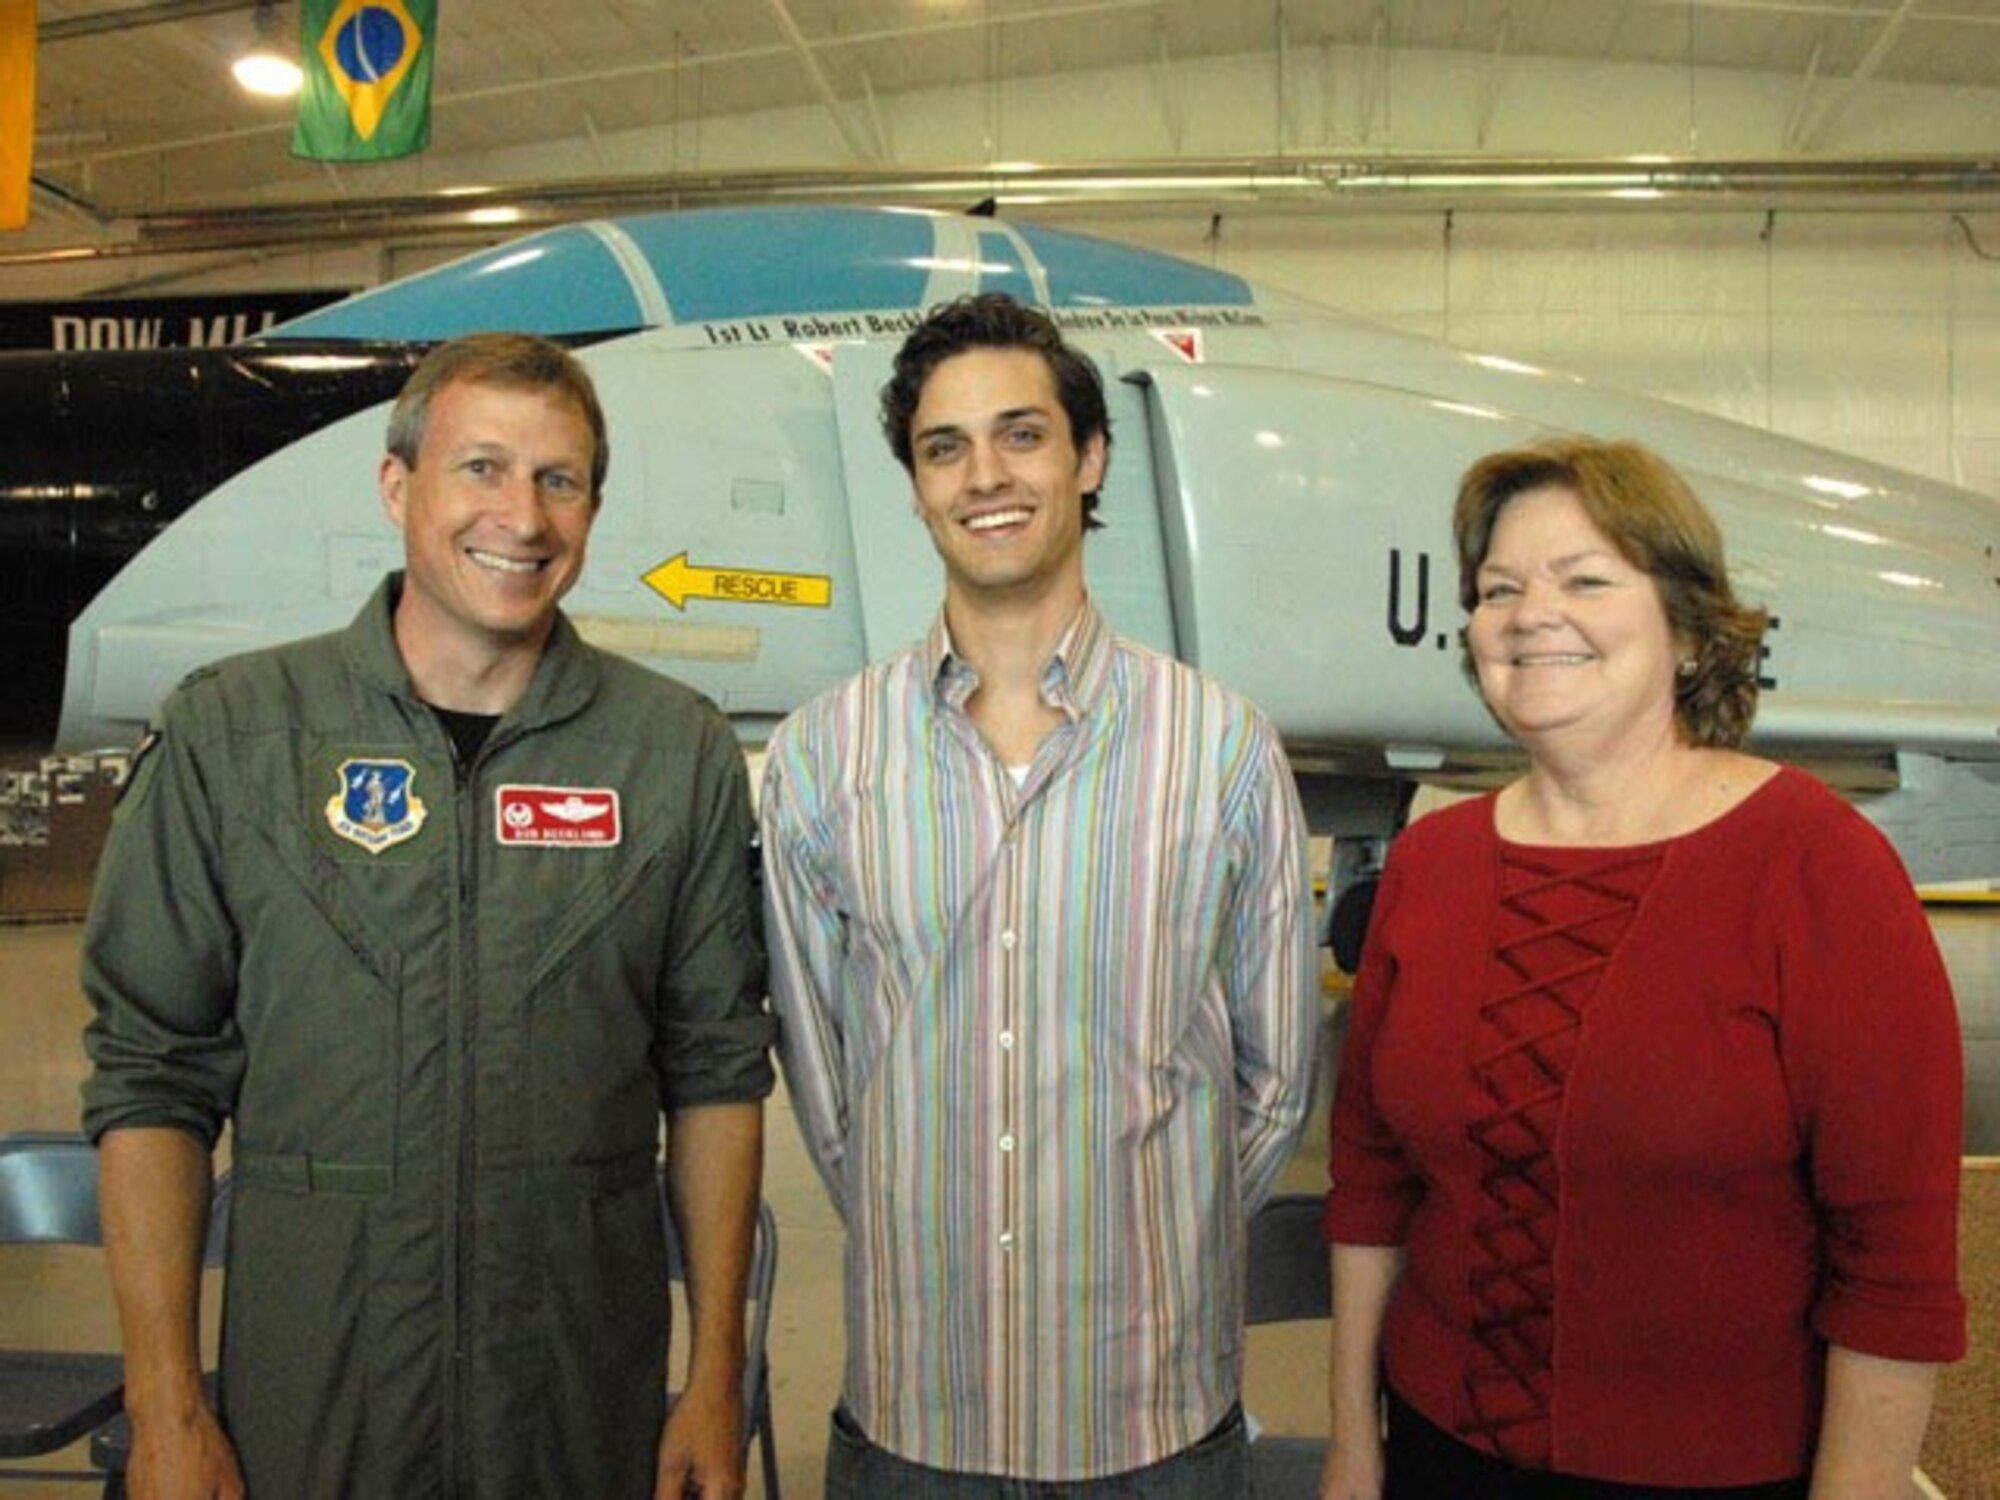 From left to right Col. Robert J. Becklund flew the F-4 that delivered the transplant heart, Andrew De La Pena is the heart recipient, and Marguerite E. Brown, RN, MSN, is a member of the team that recovered the heart.  Marguerite Brown was the Stanford University Medical Center nurse who handled the little red and white cooler with the tiny heart in it to Col. Becklund as he prepared to speed off into the night in his F-4 to California.